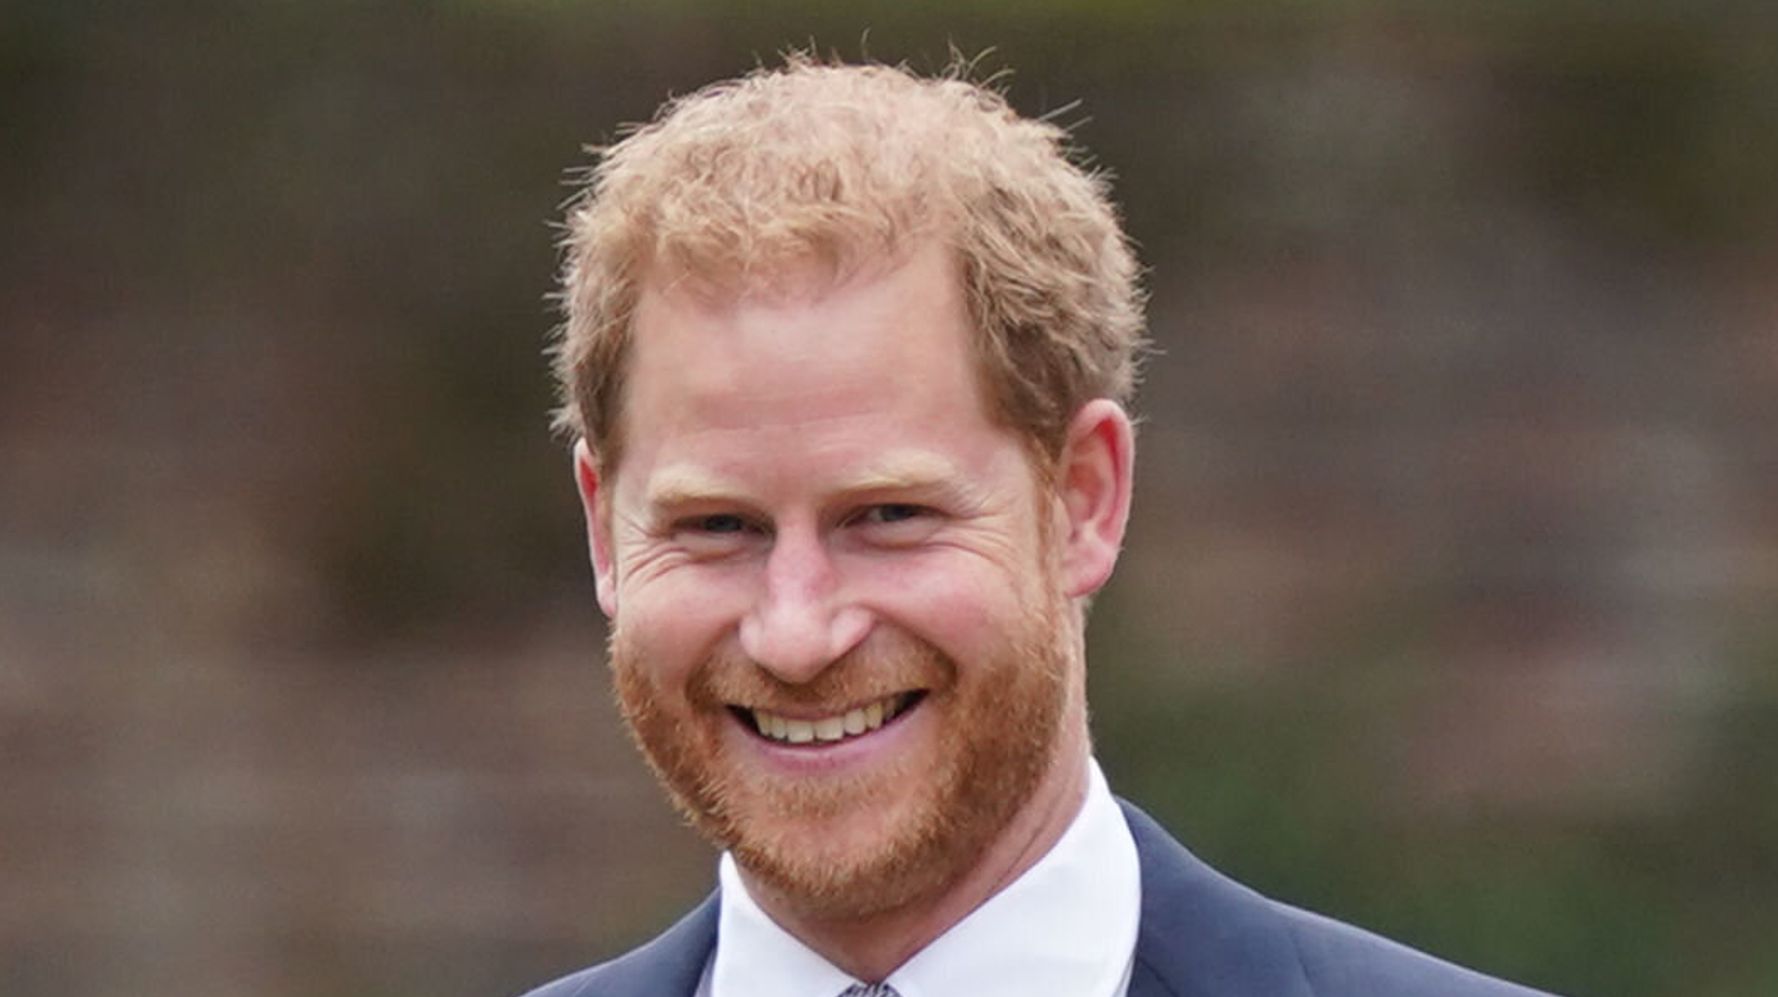 Prince Harry Makes Major Announcement About Proceeds From His Book Deal